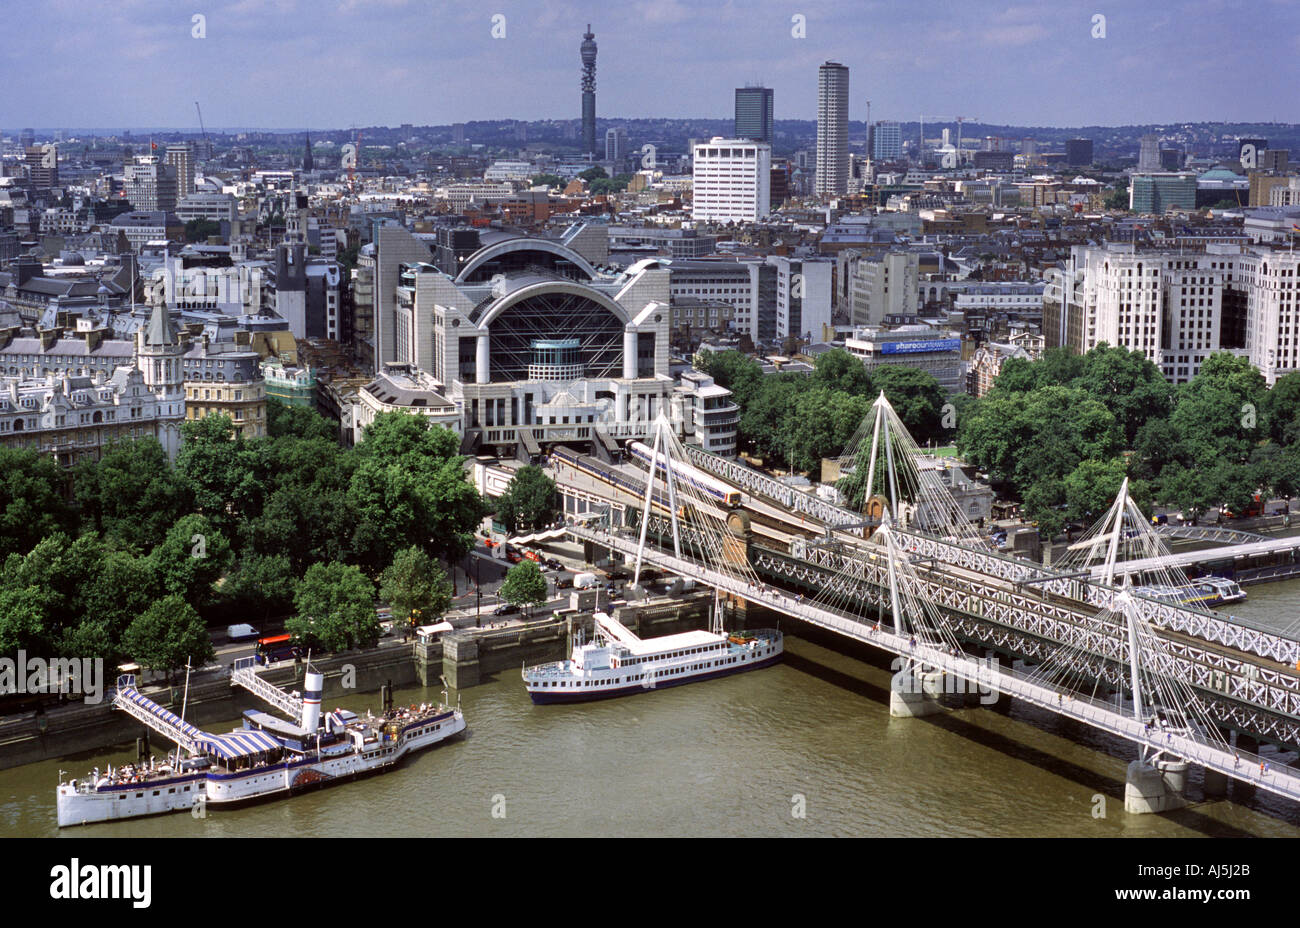 Charing Cross Station from the London Eye, England, UK. Stock Photo